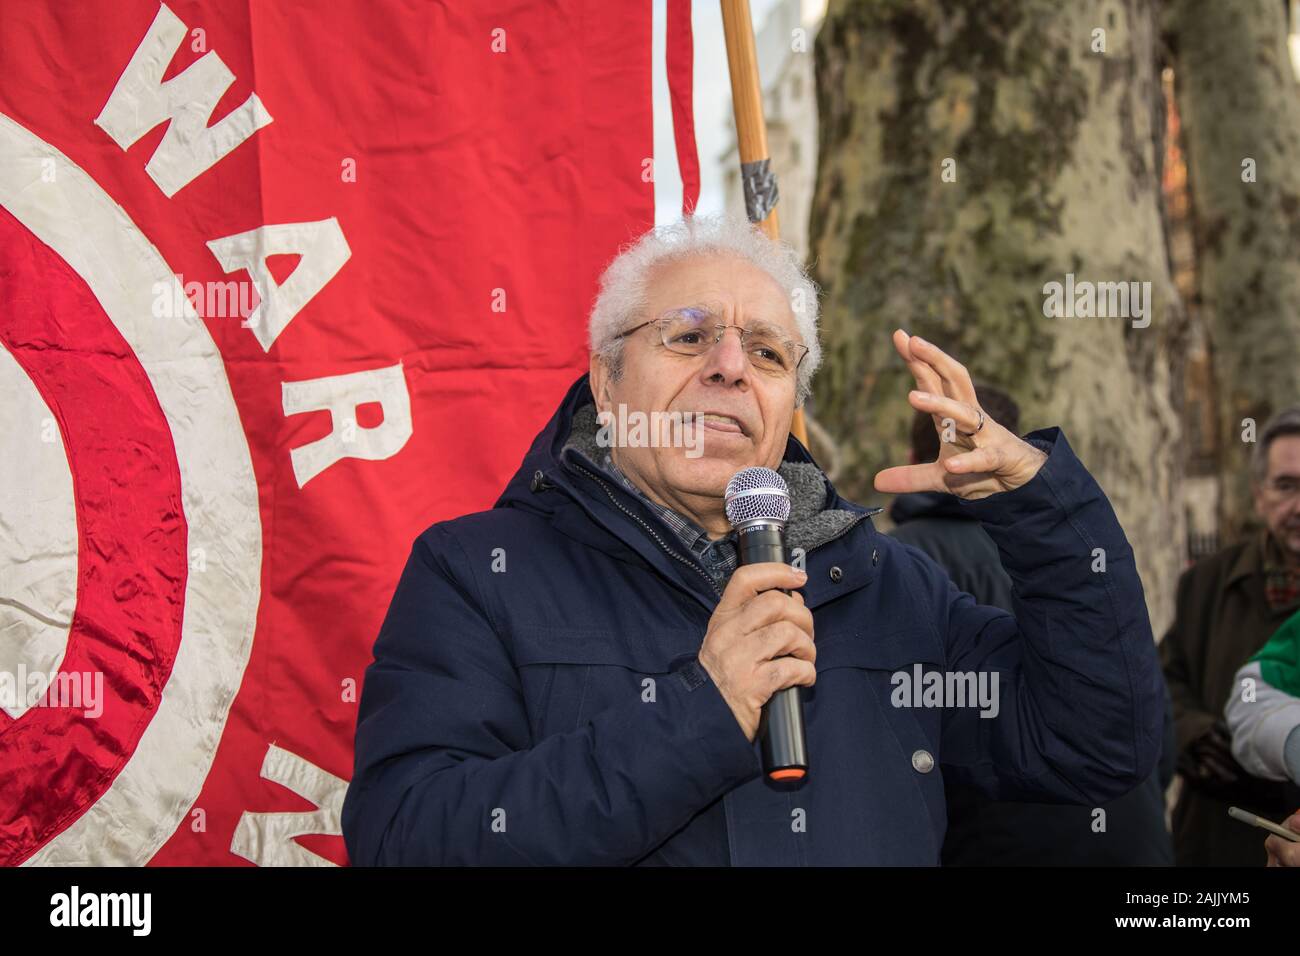 London, UK. 4 January, 2020. Sami Ramadani, lecturer on Middle East current affairs addresses the  demonstration organised by The Stop Thr War Coalition, several hundred  rallied outside of Downing Street to urge the Government not to go to war in Iran. David Rowe/ Alamy Live News. Stock Photo